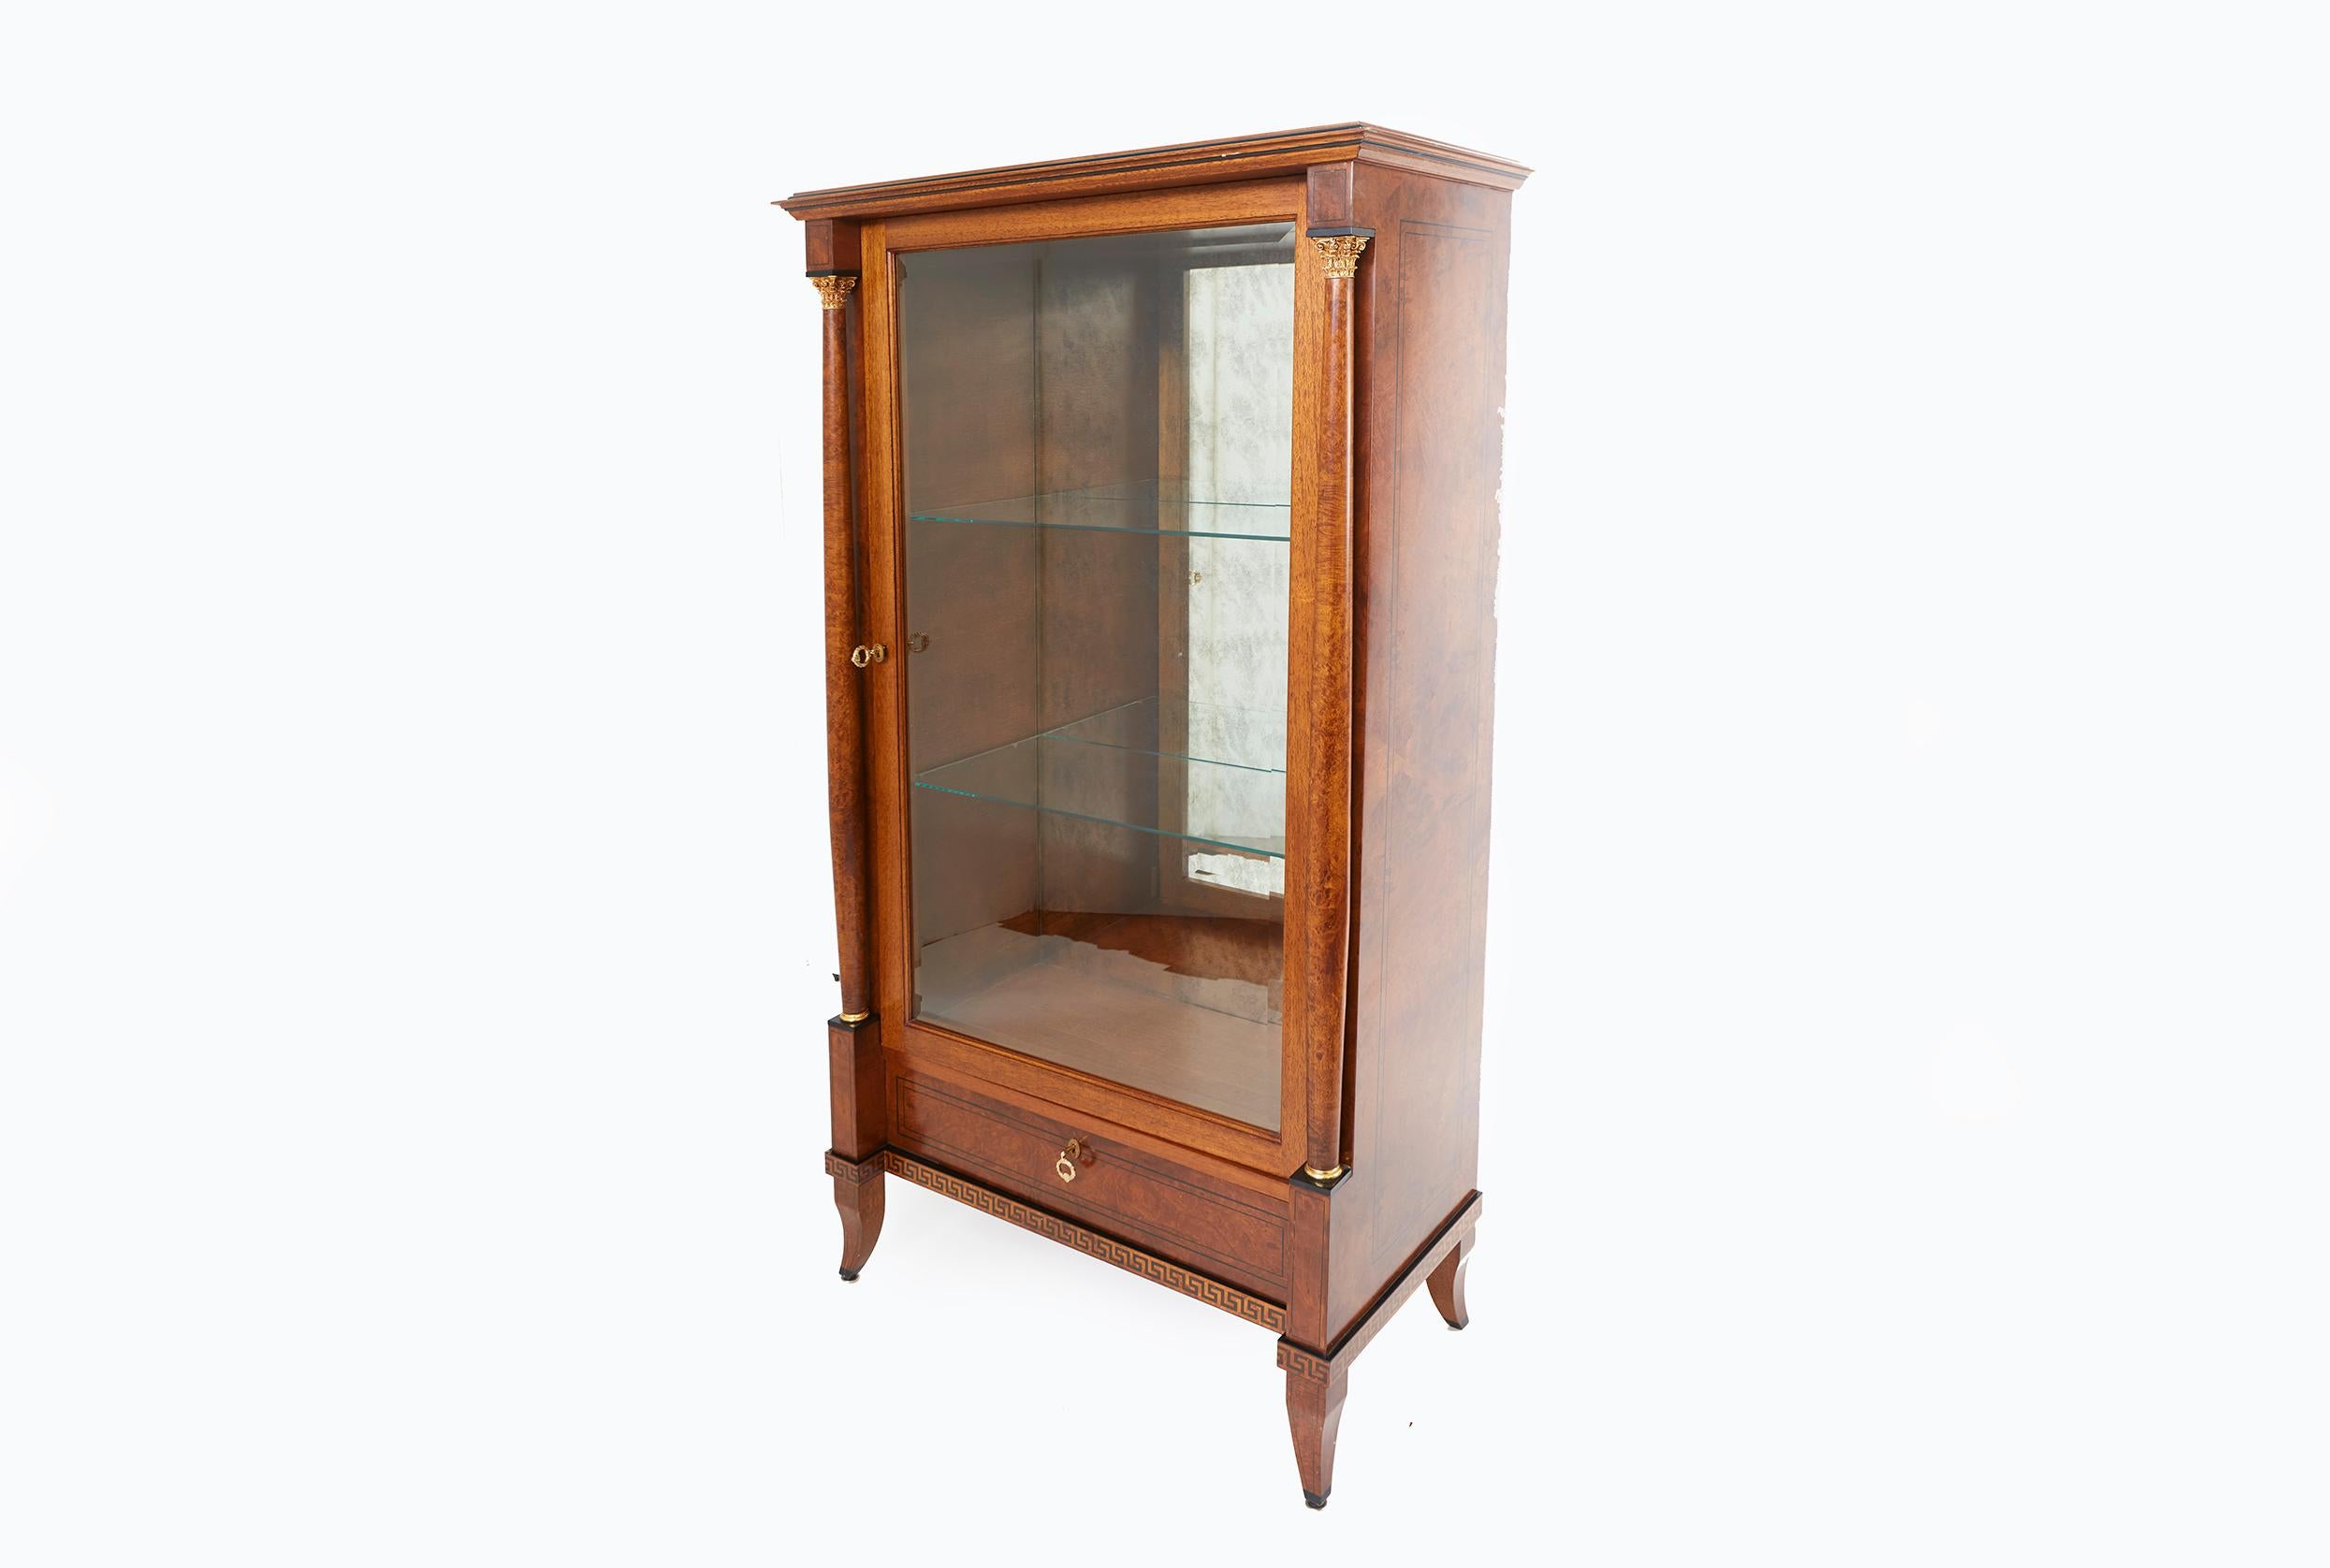 Late 19th century continental mahogany wood with mirrored back and glass shelves display cabinet with gilt laurel wreath as handle, with two Corinthian columns and gilt acanthus detailing. The cabinet featuring a geometrical motif with two glass